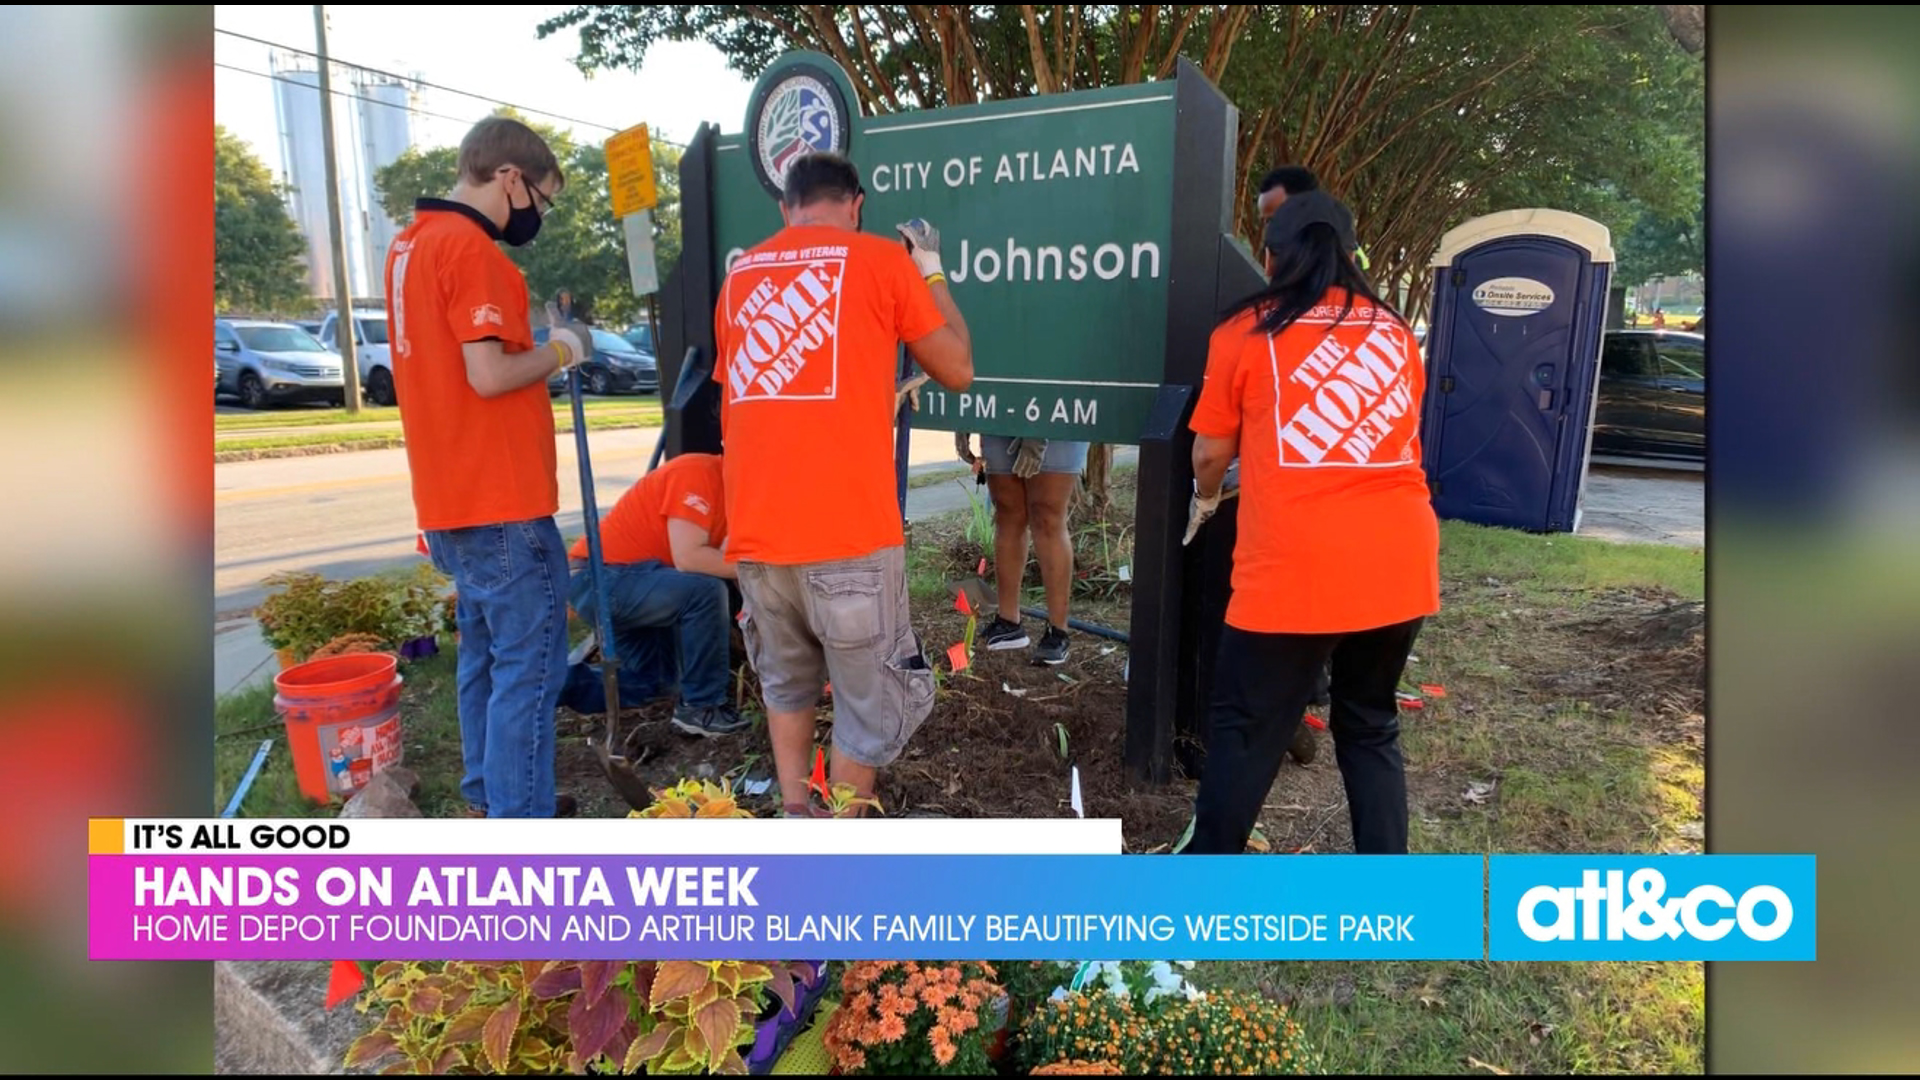 The Home Depot Foundation and the Arthur Blank Family Foundation are celebrating the co-founder's 80th birthday with acts of service in our communities.